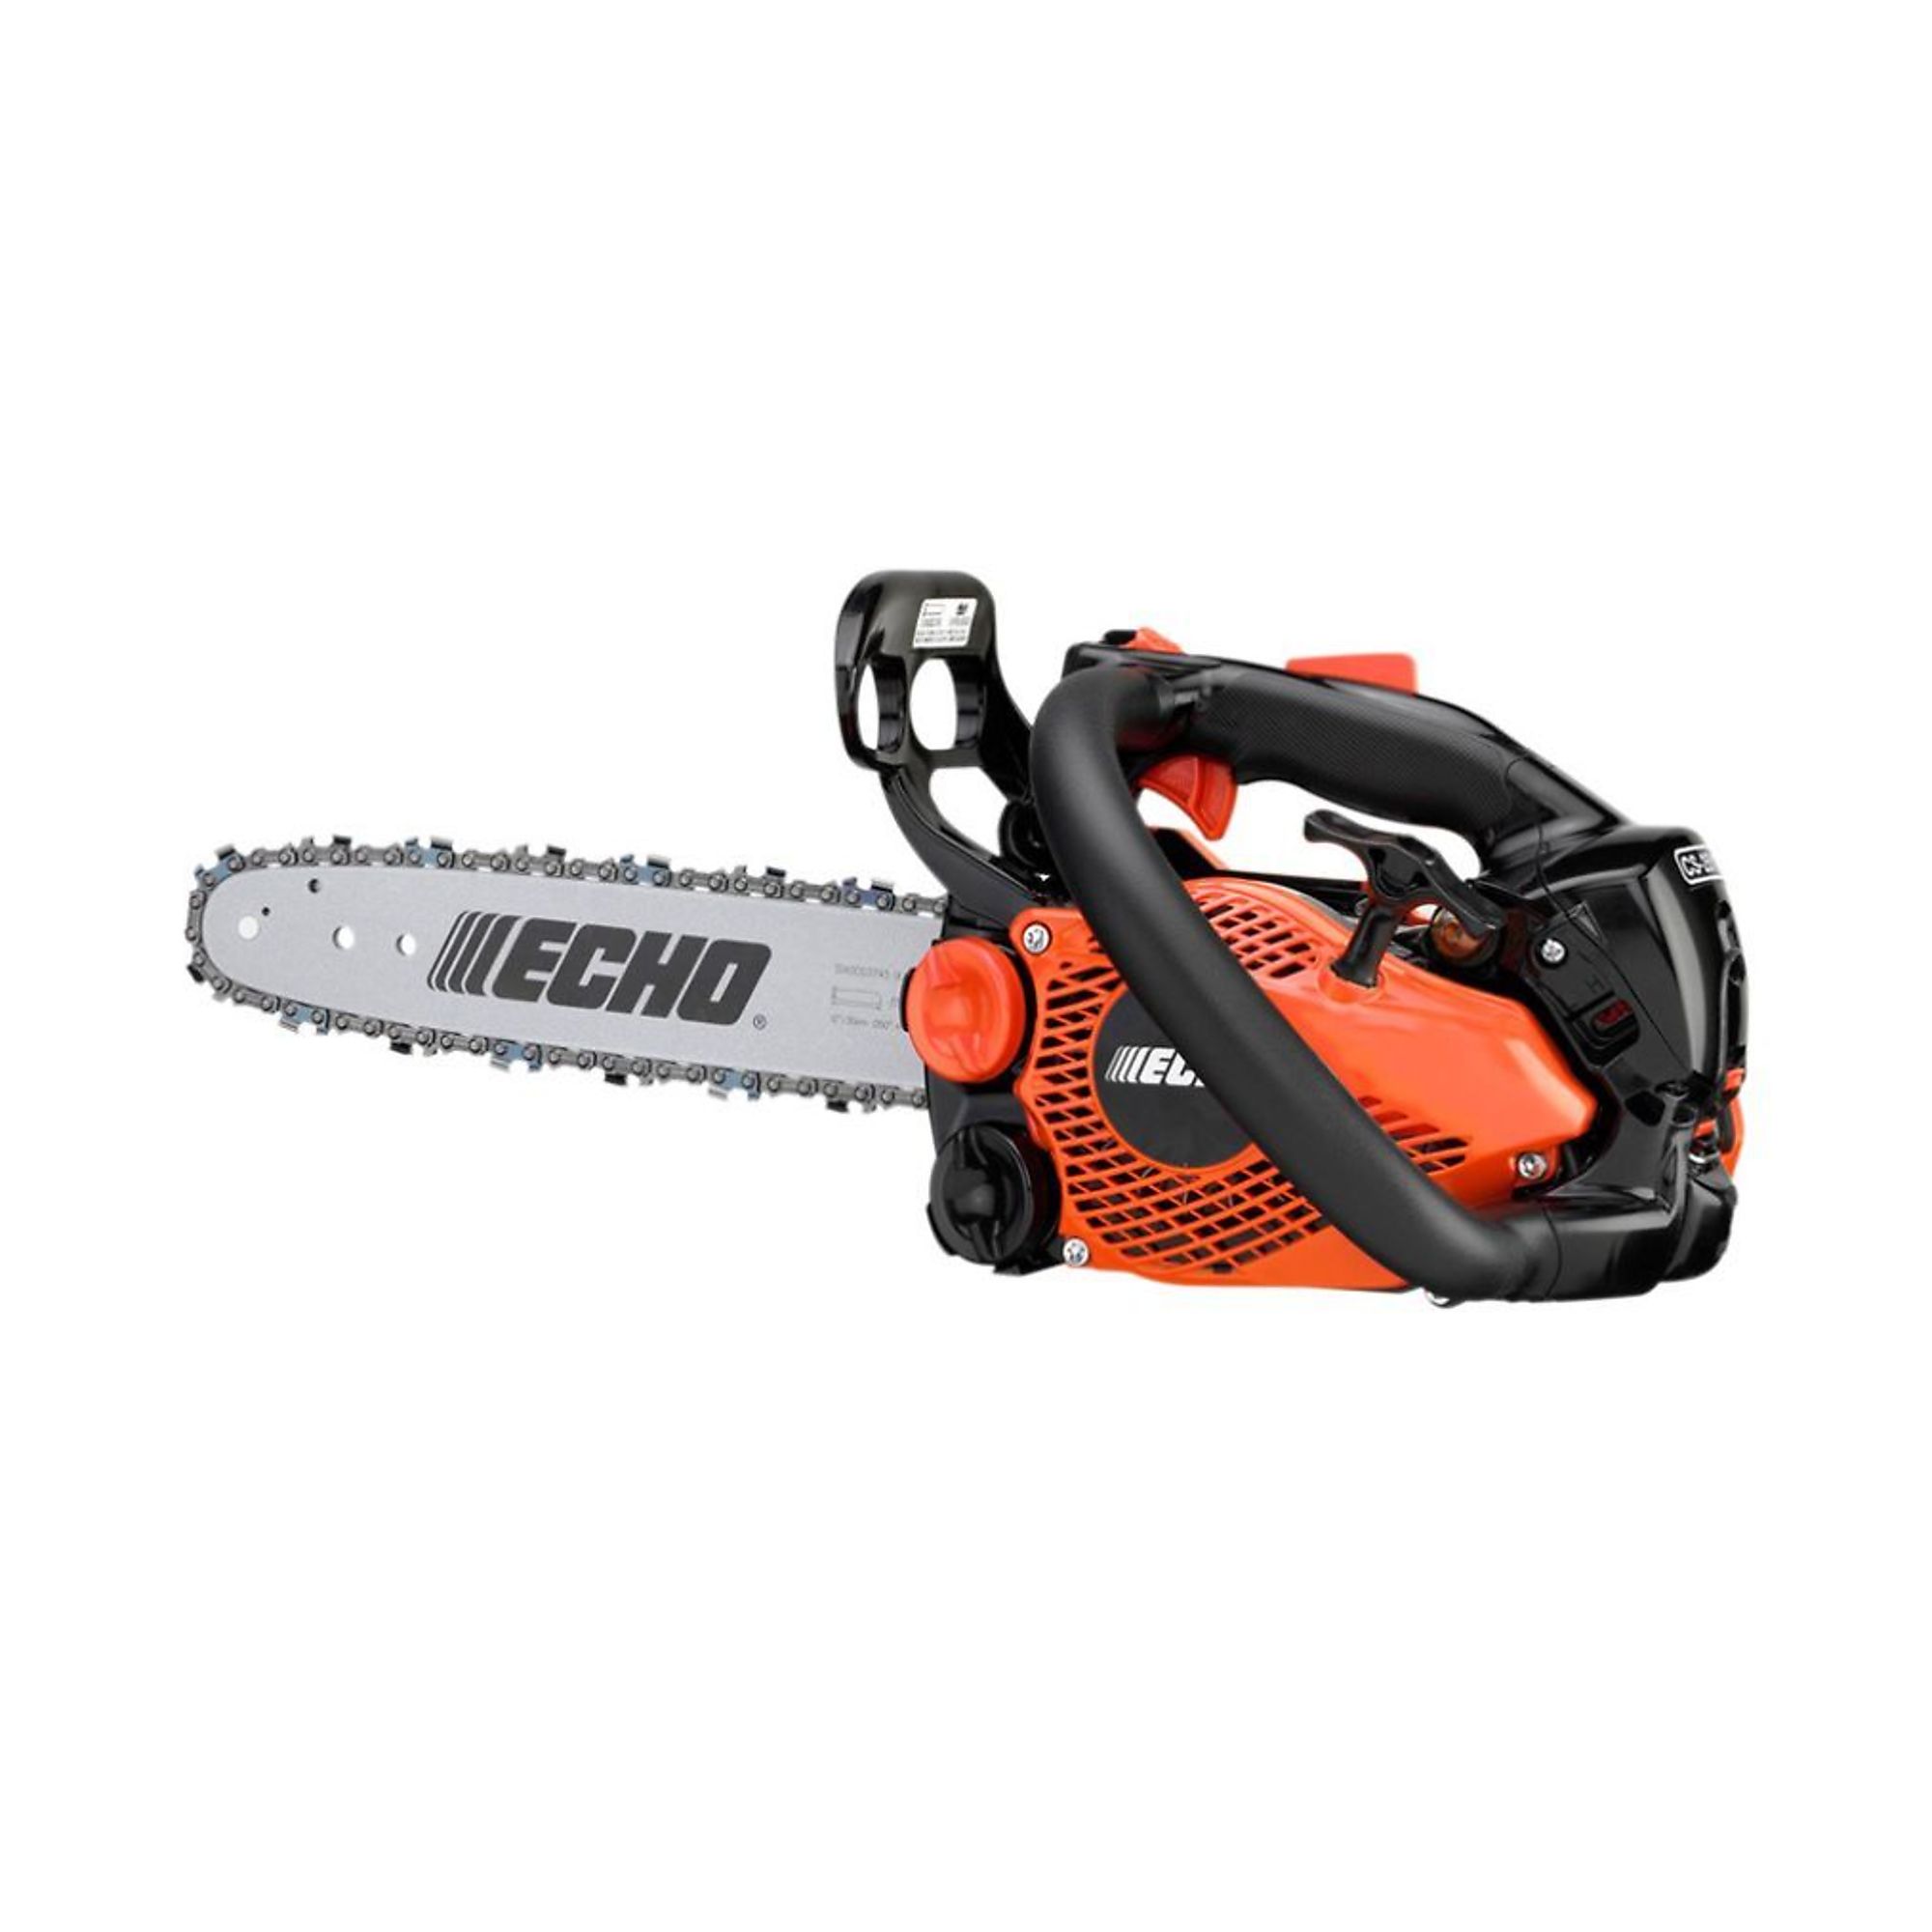 ECHO X Series, Gas-Powered Top Handle Chainsaw, Bar Length 12 in, Engine Displacement 25 cc, Model CS-2511T-12